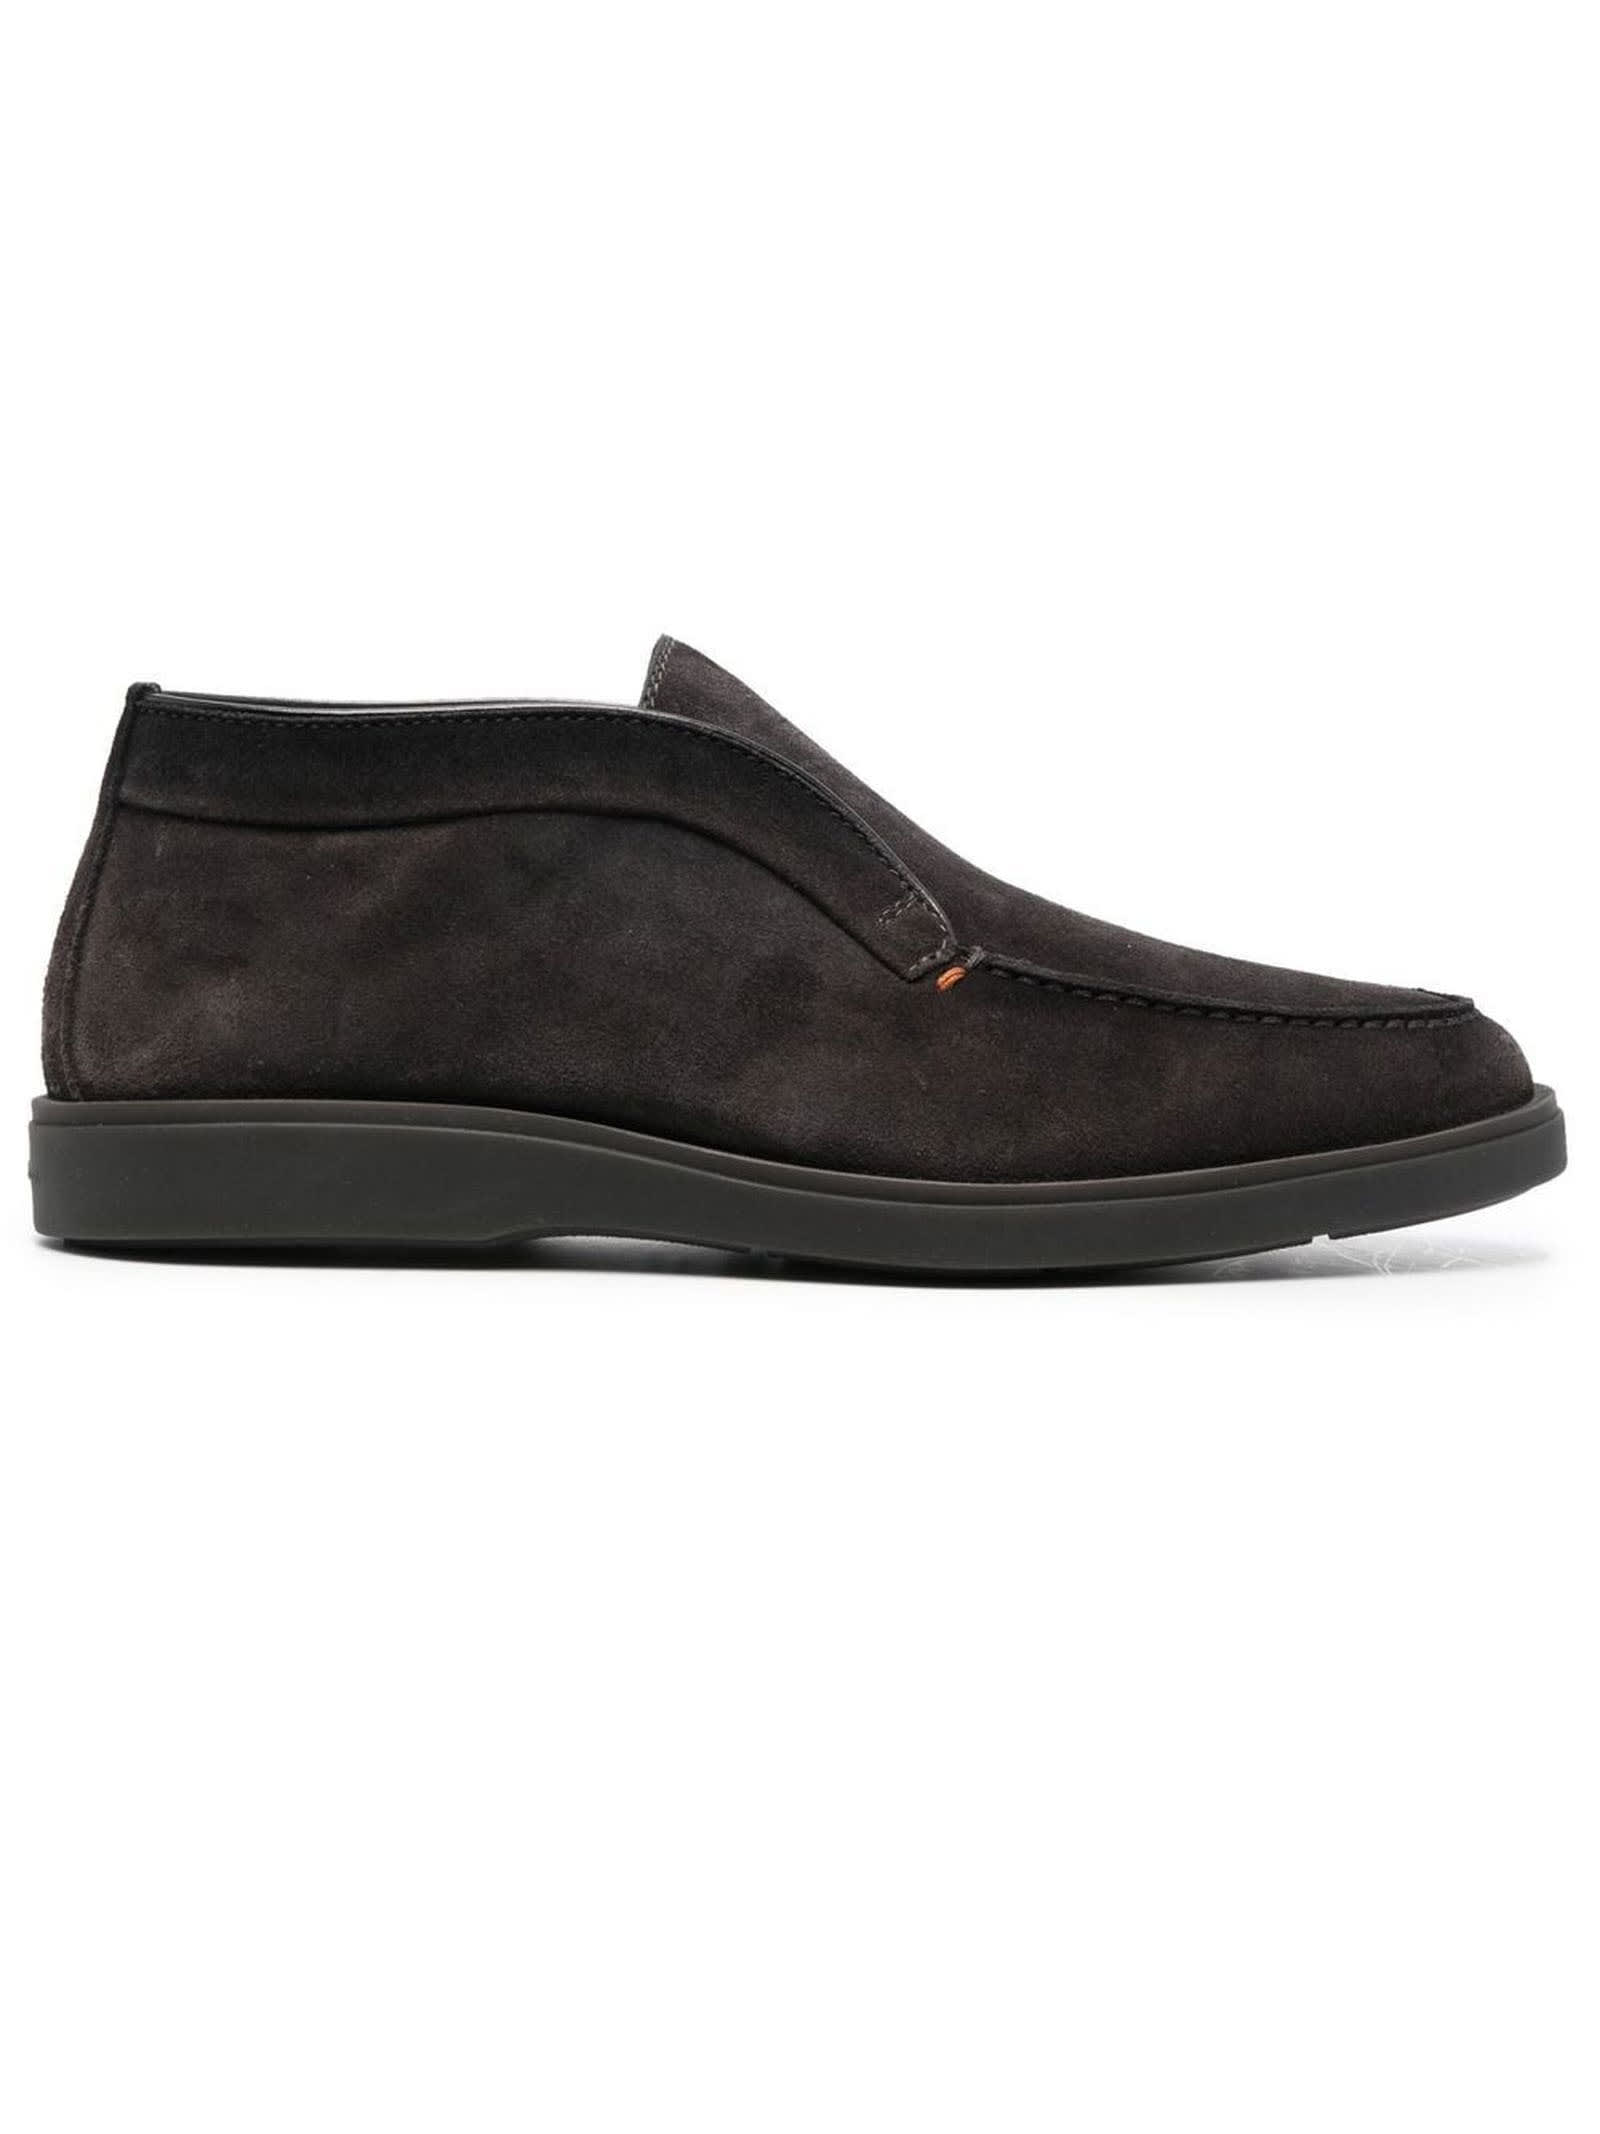 SANTONI BROWN SUEDE ANKLE BOOTS